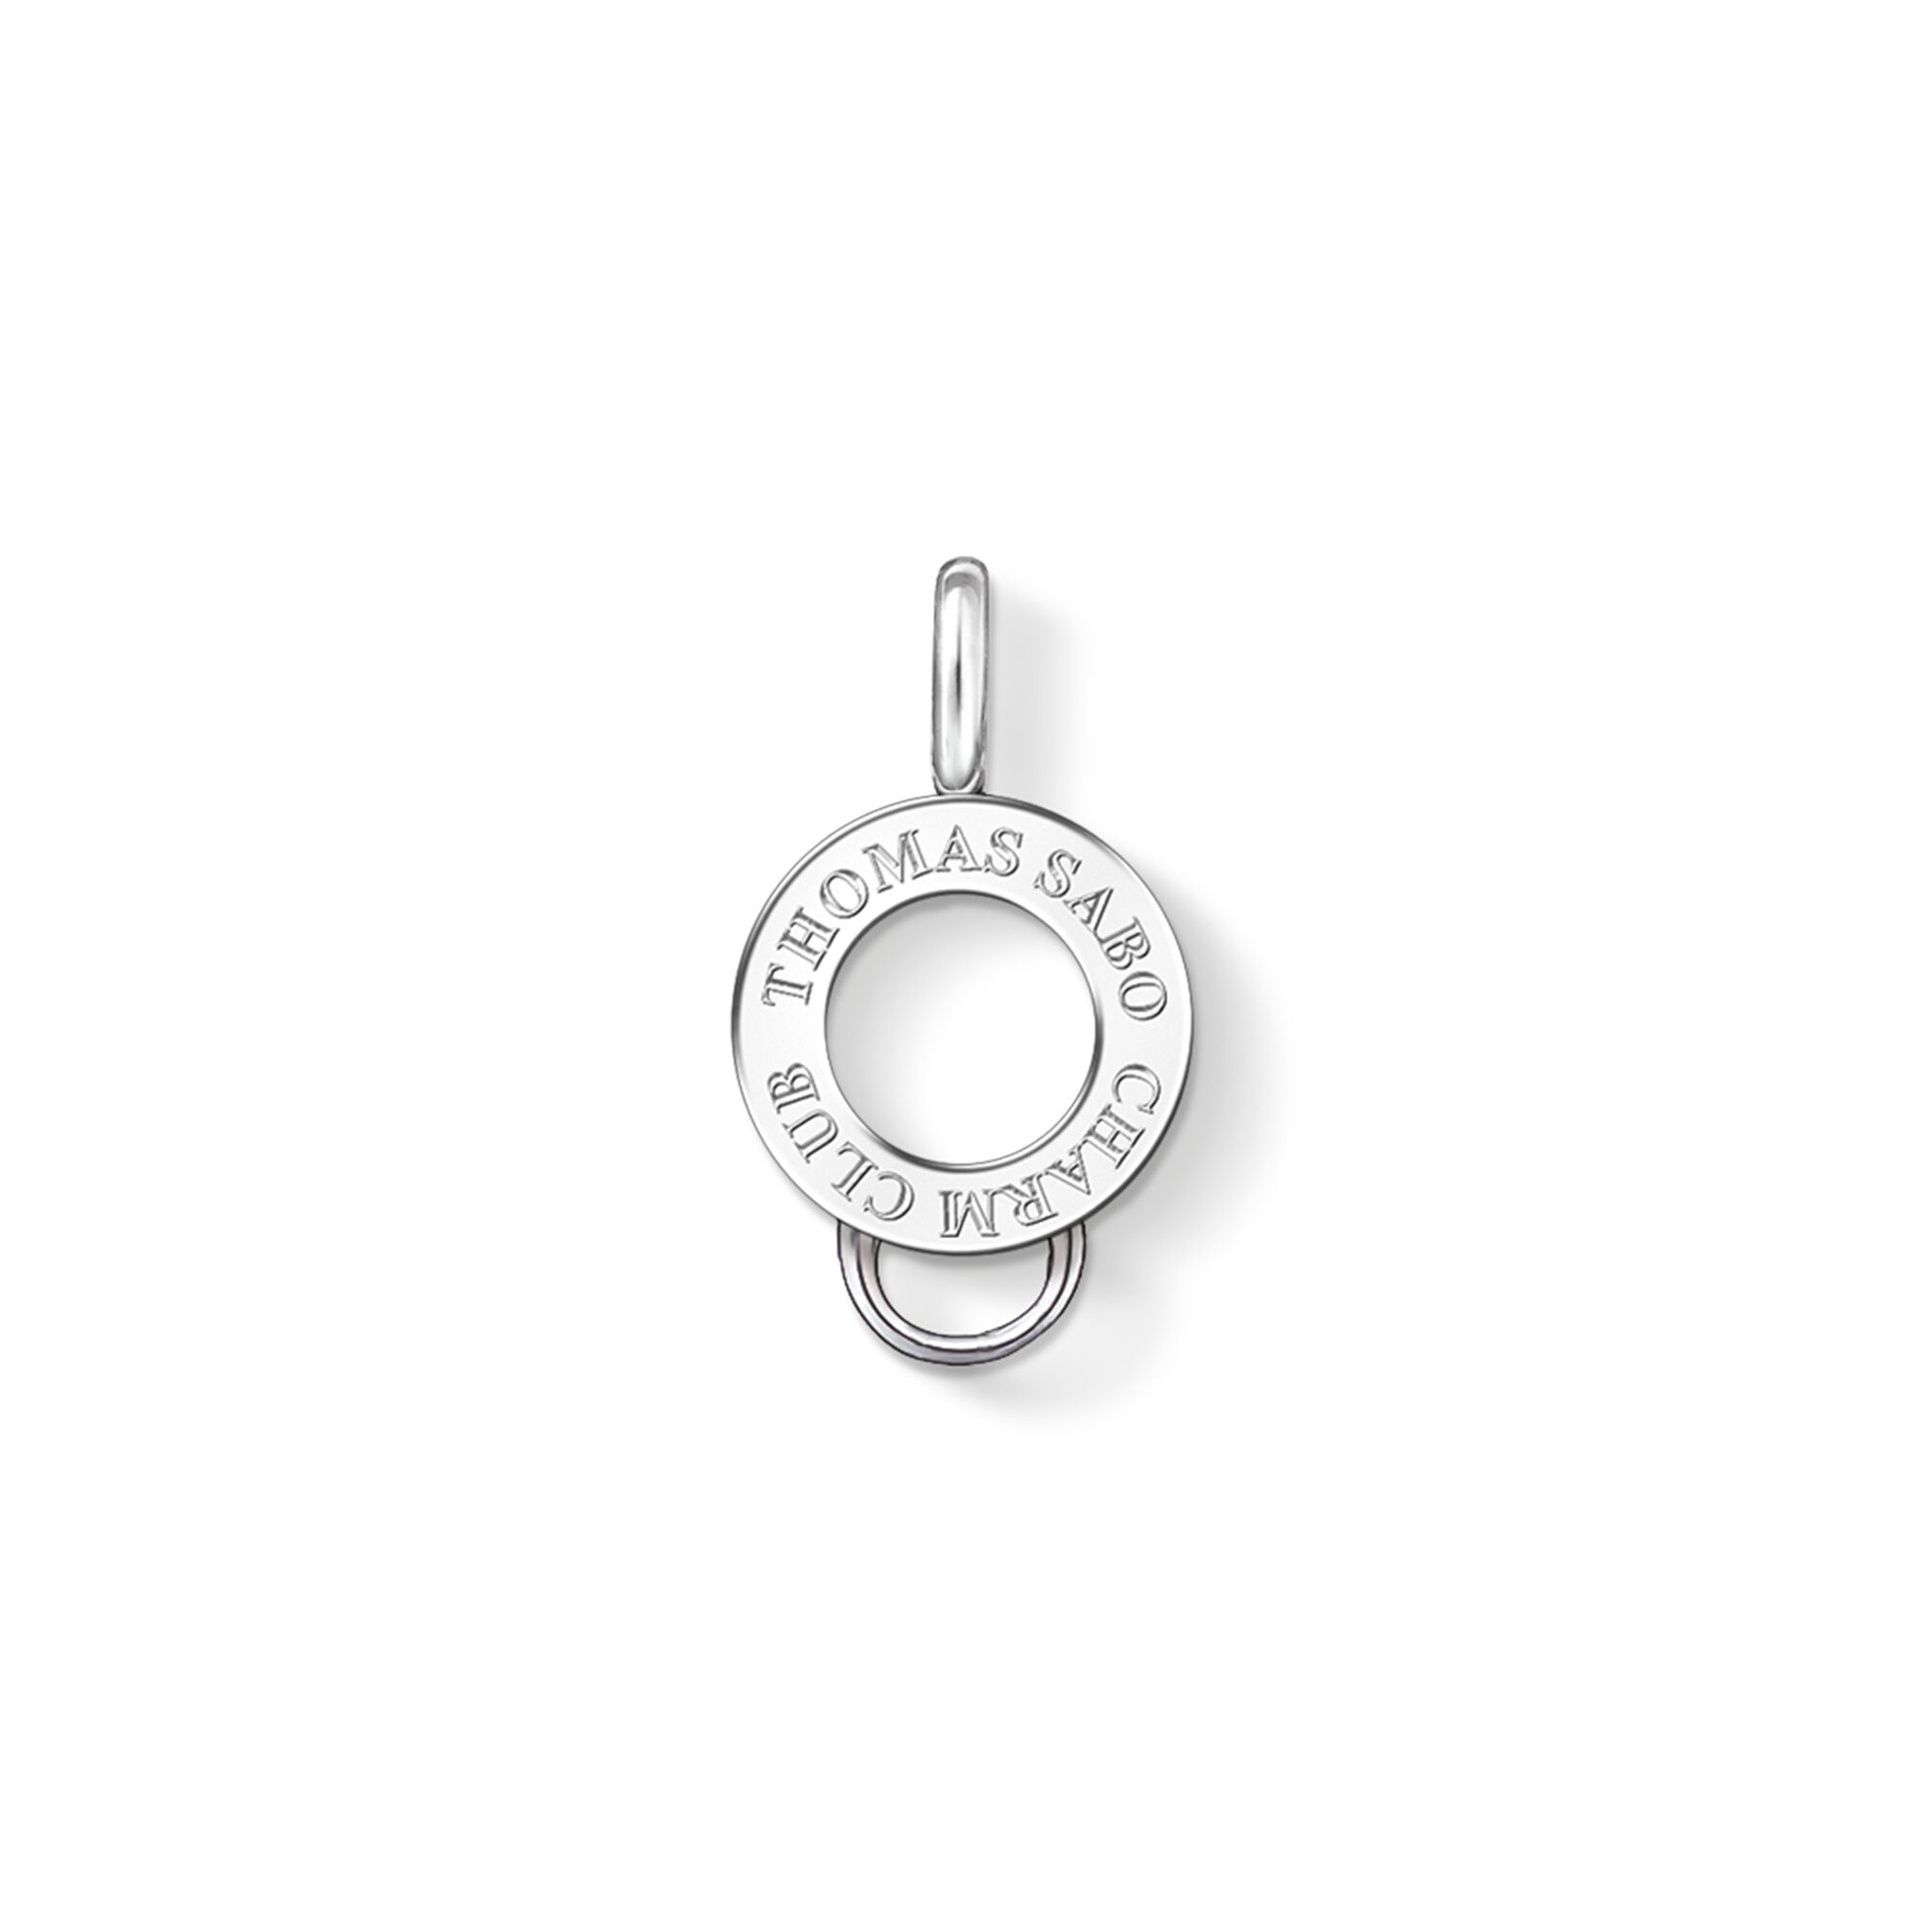 Buy Thomas Sabo Small Signature Charm Carrier - Silver Online